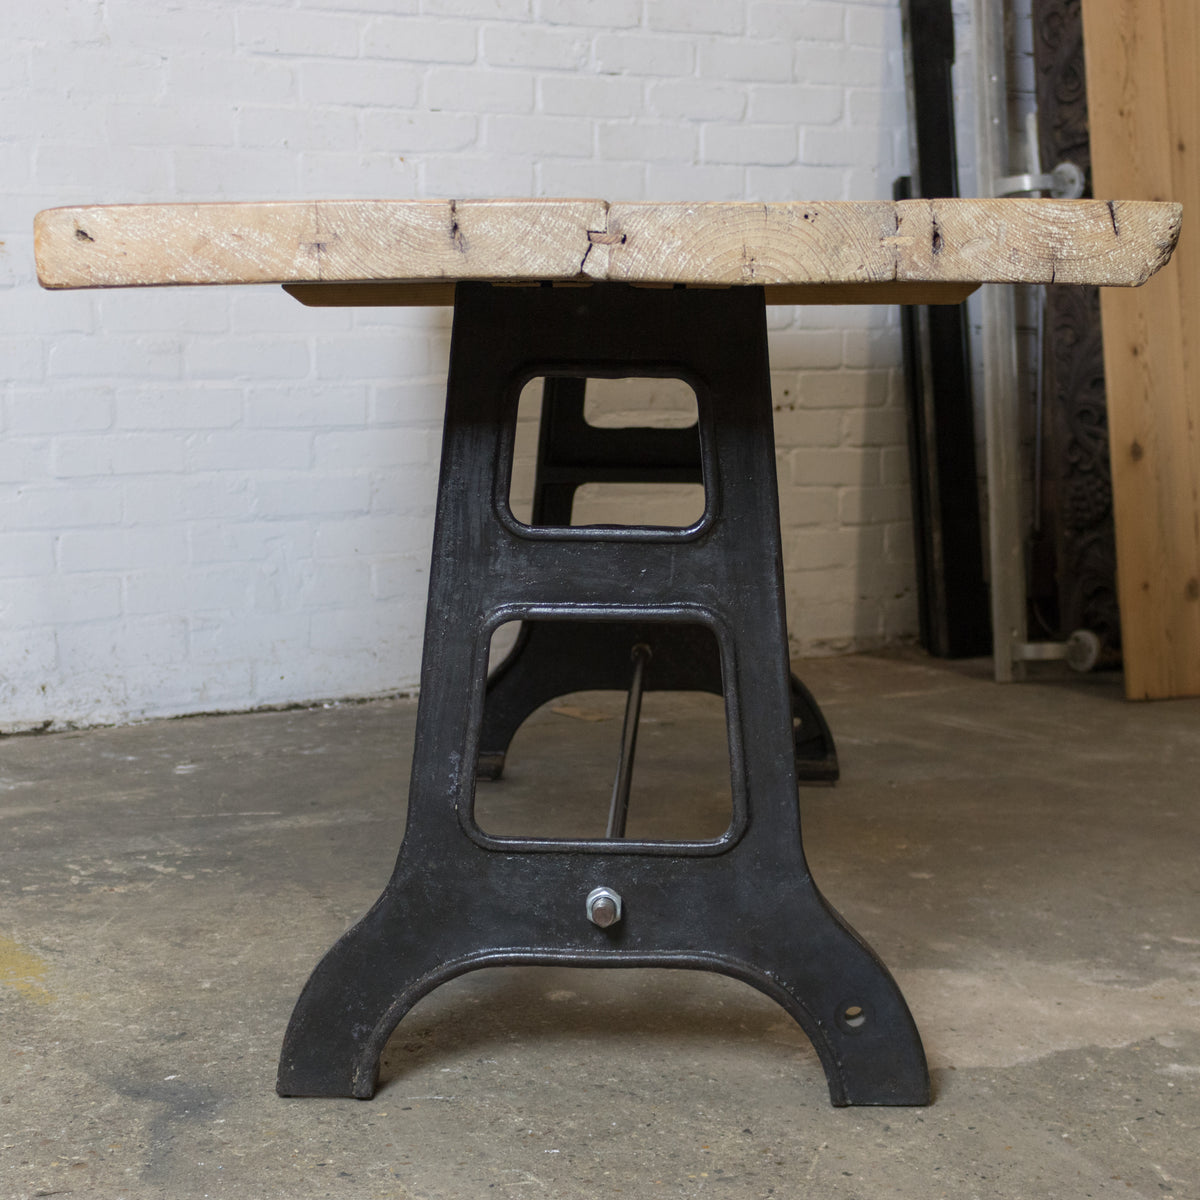 Antique Plank Top Table Refectory With Cast Iron Legs | The Architectural Forum